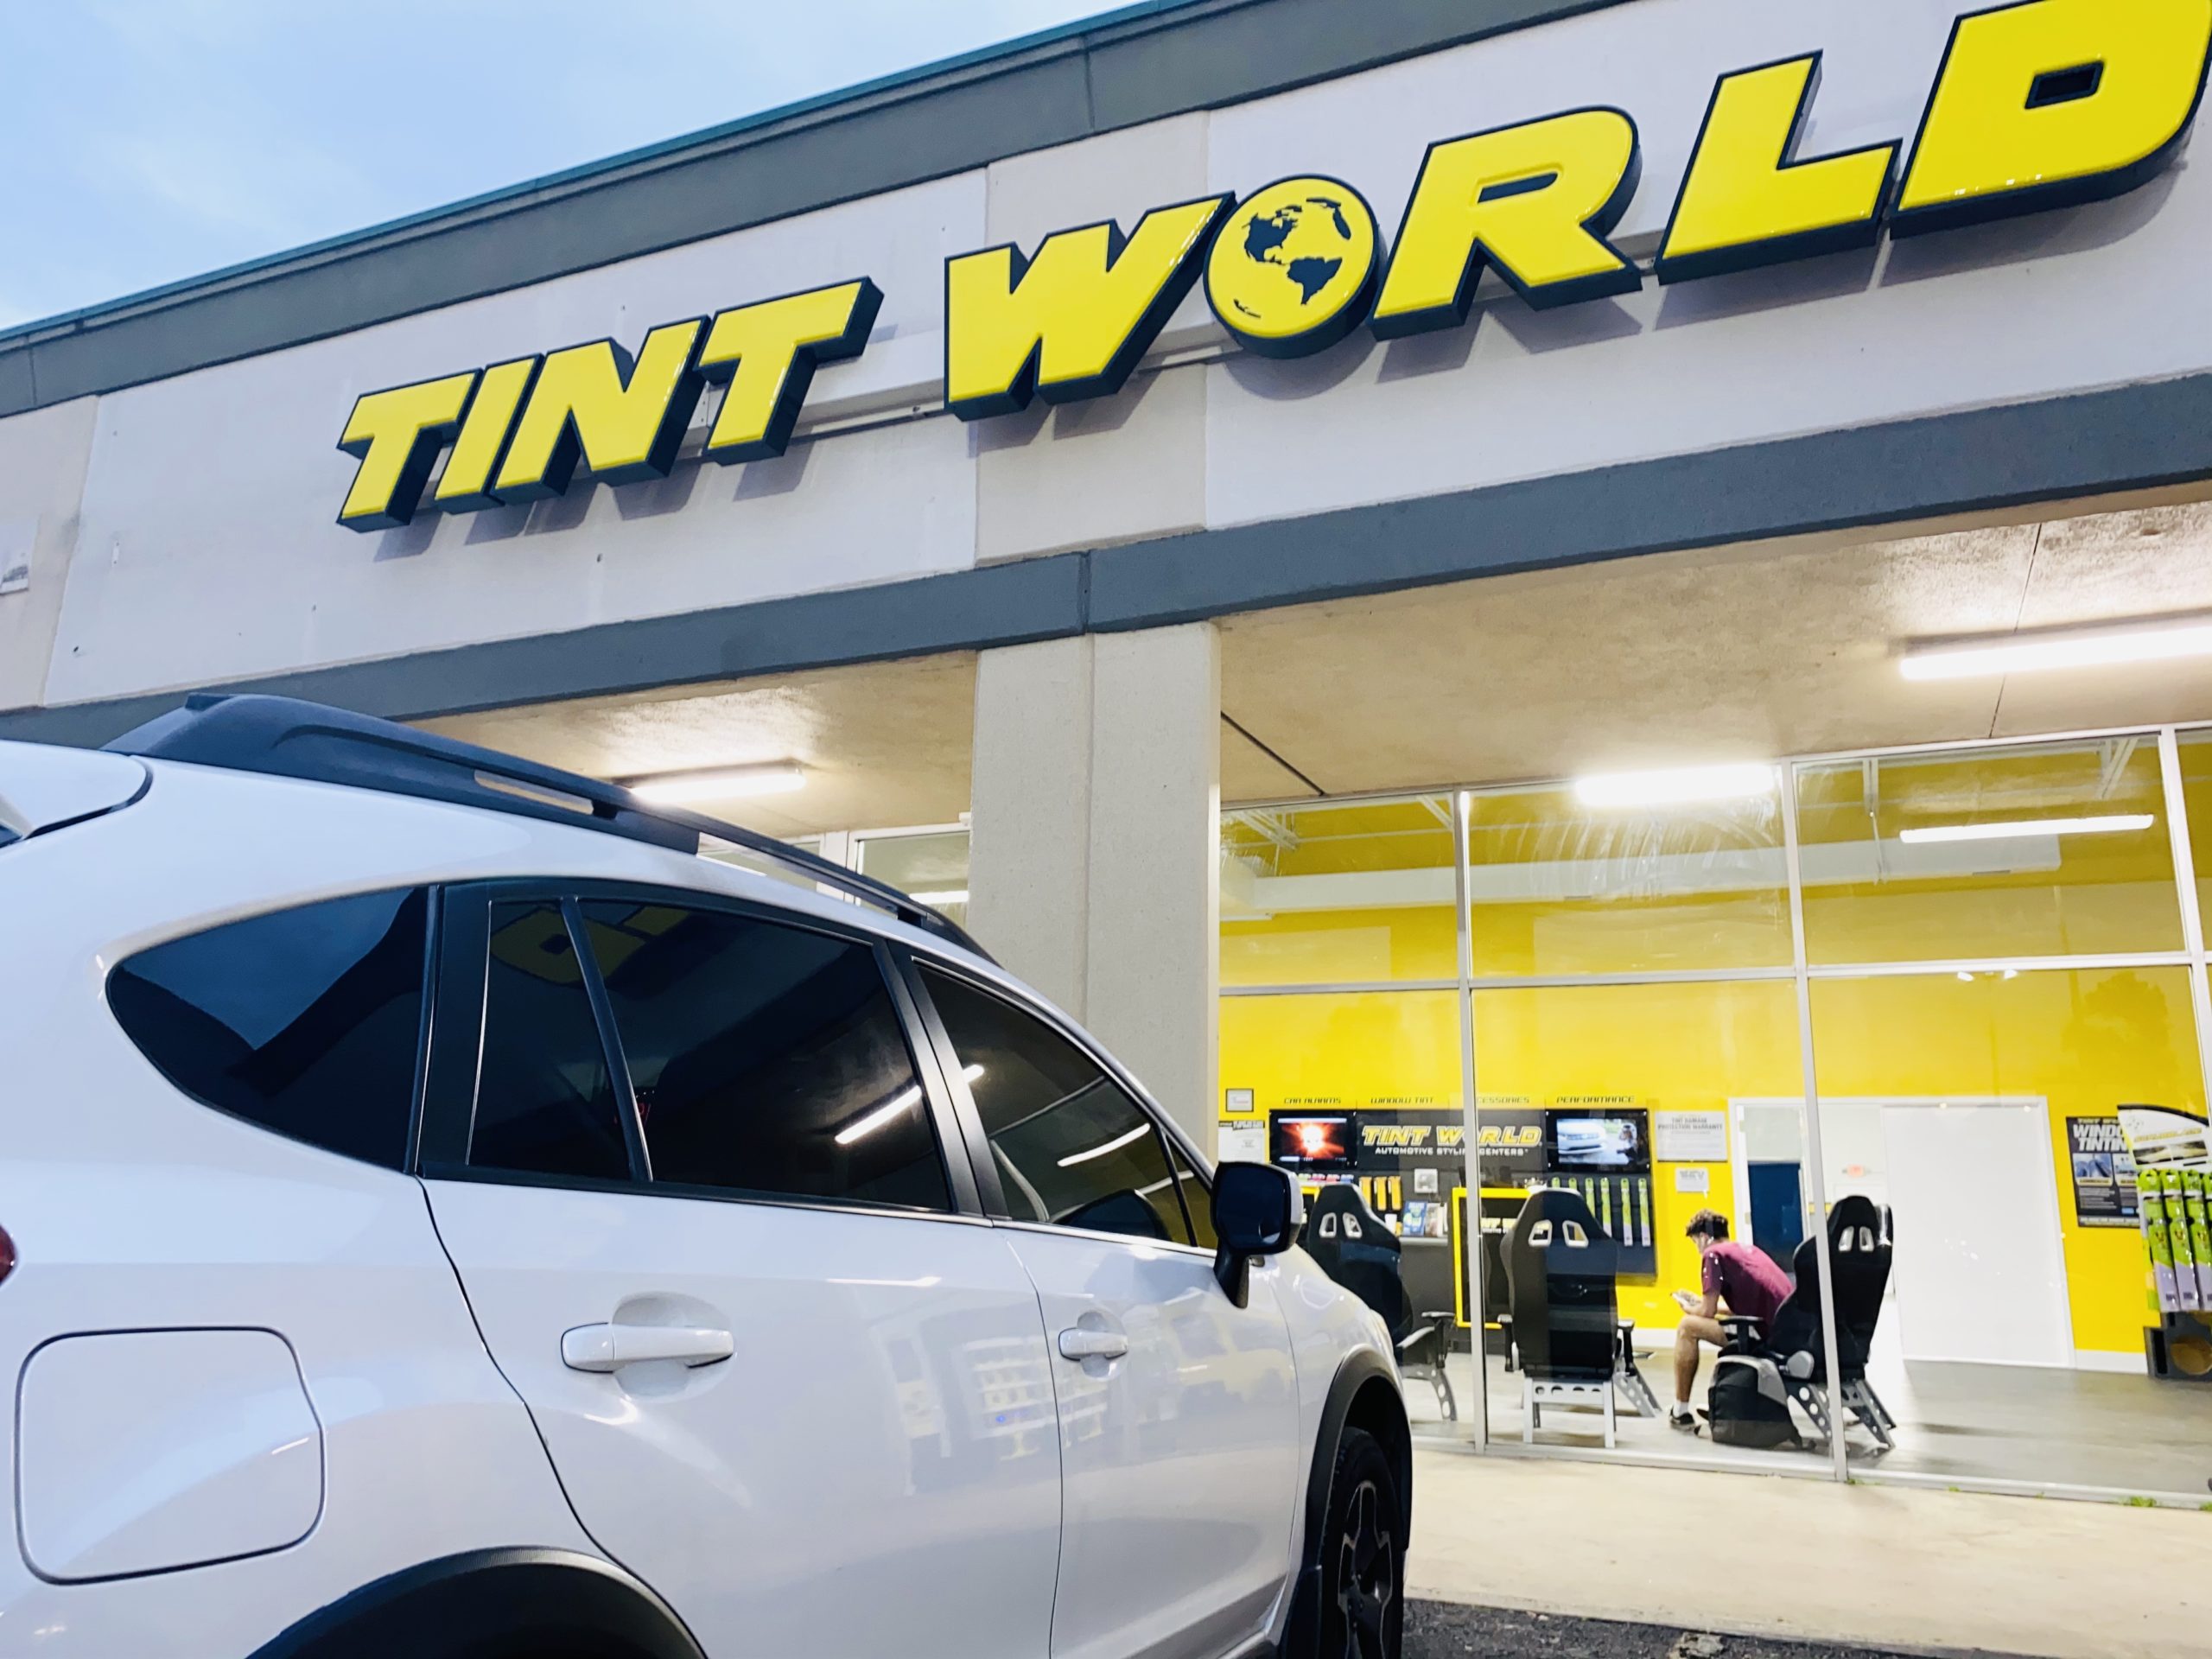 Tint World Opens New Texas Location | THE SHOP